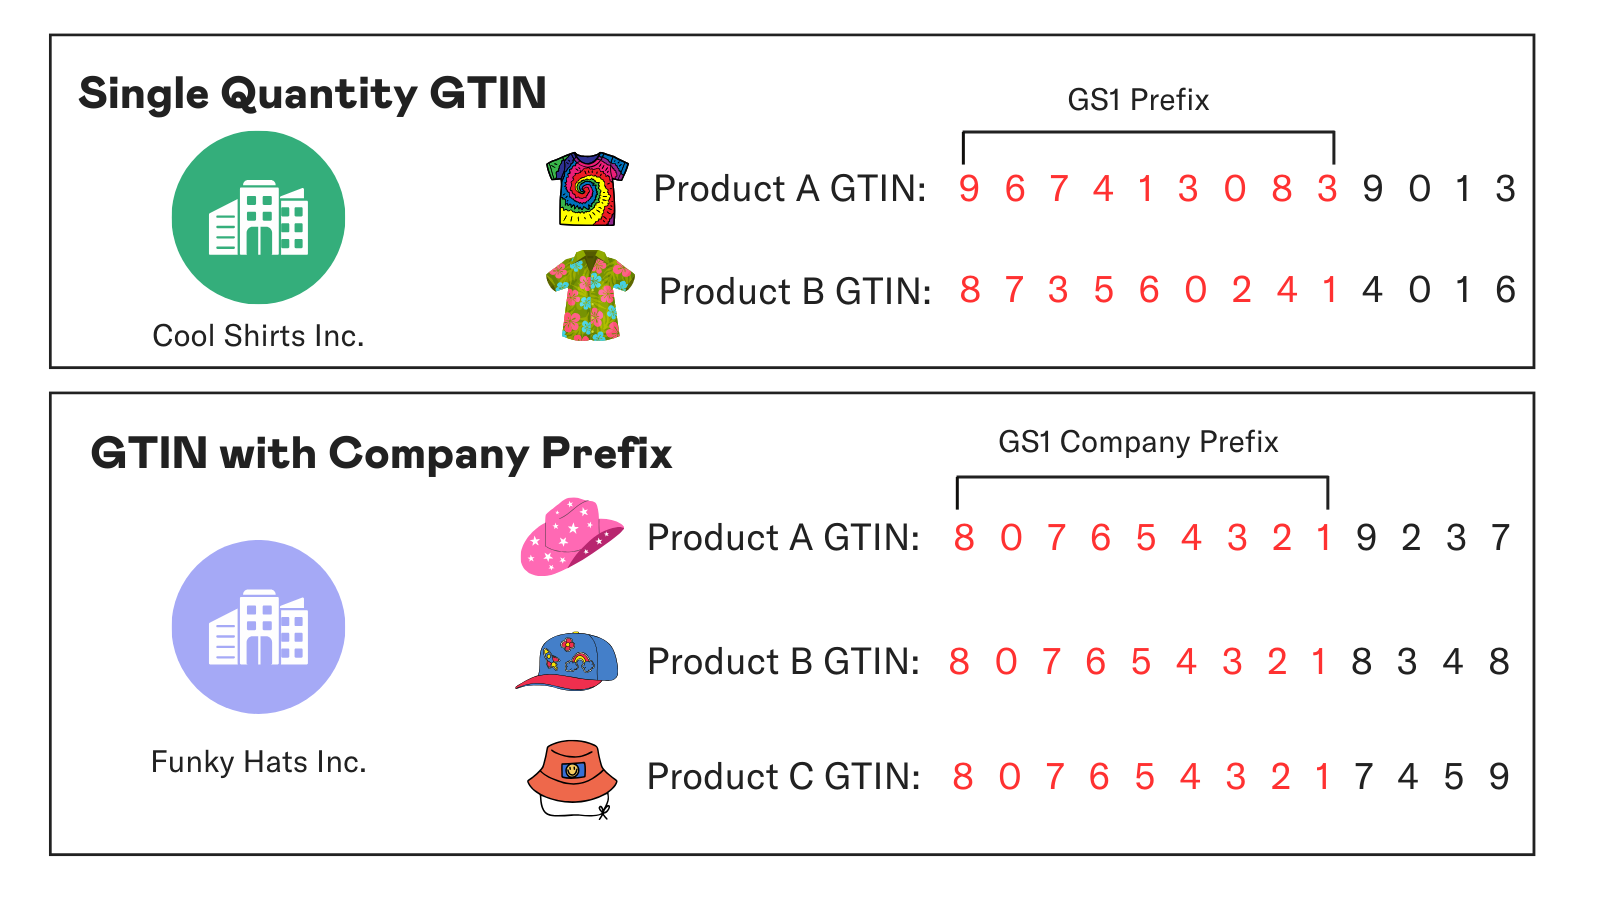 Difference between the structure of a Single Quantity GTIN and a Company Prefix